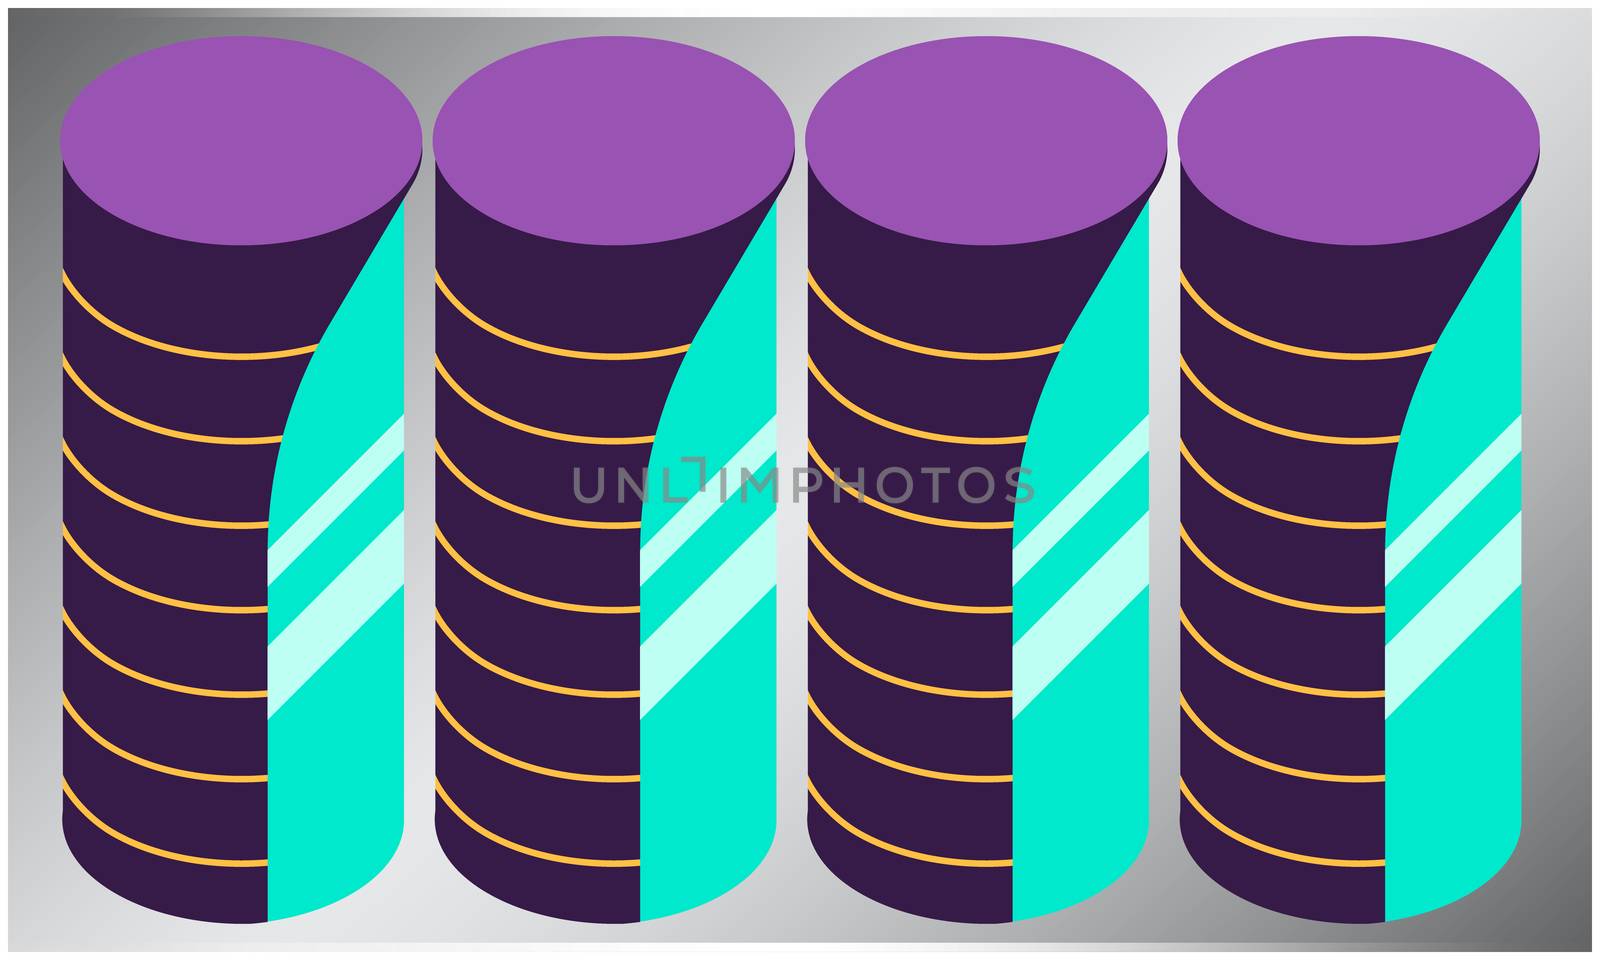 digital textile design of various coins on abstract background